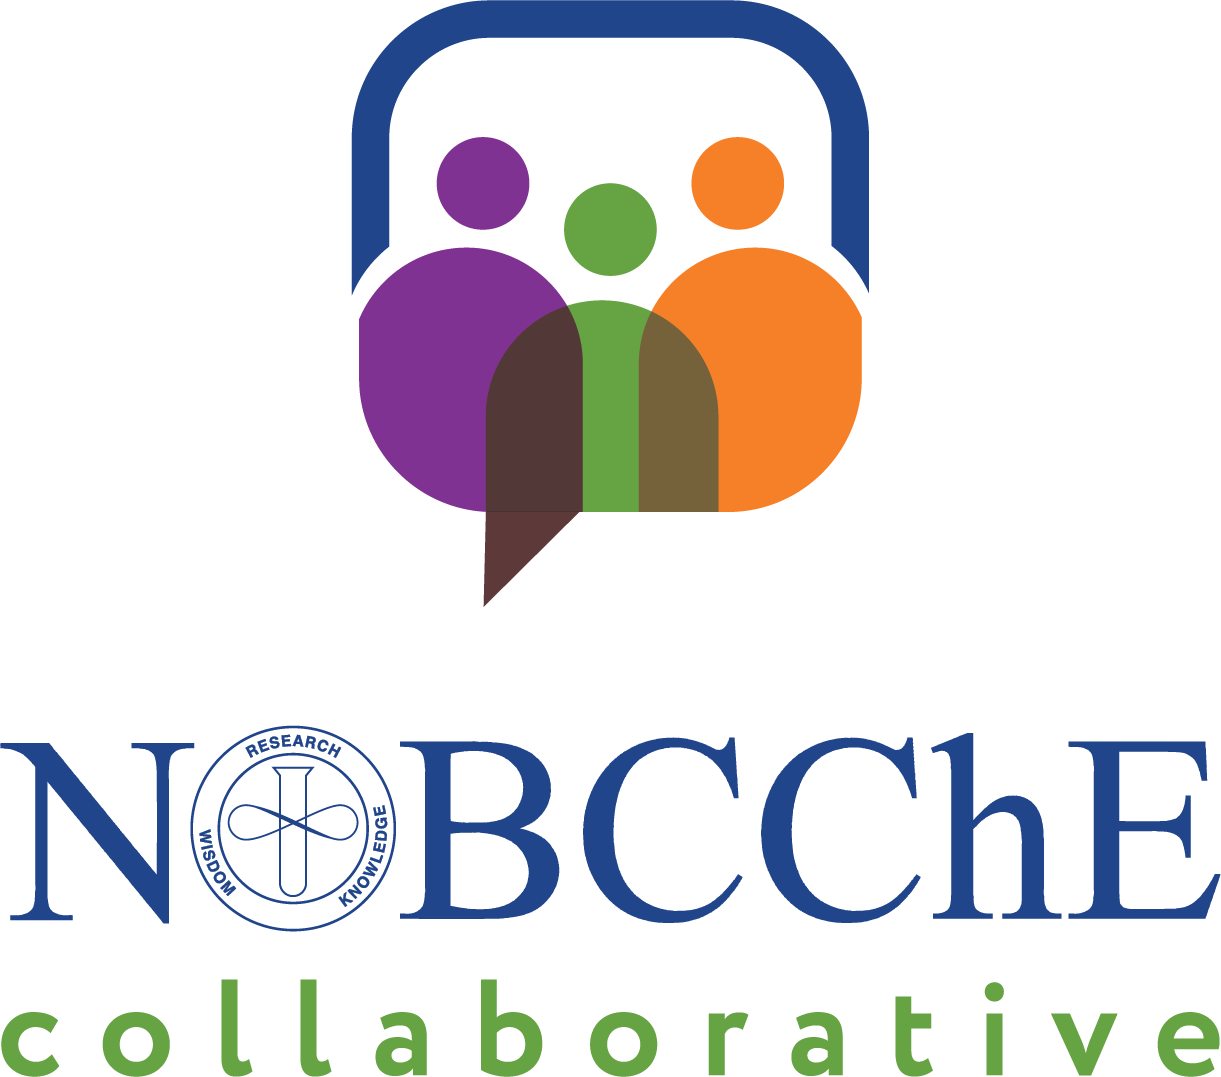 Three overlapping, abstract human torsos in a speech bubble; one purple, one green, one orange.  The bubble outline is blue.  Underneath the image is the NOBCChE logo in blue, and under that is the word collaborative.